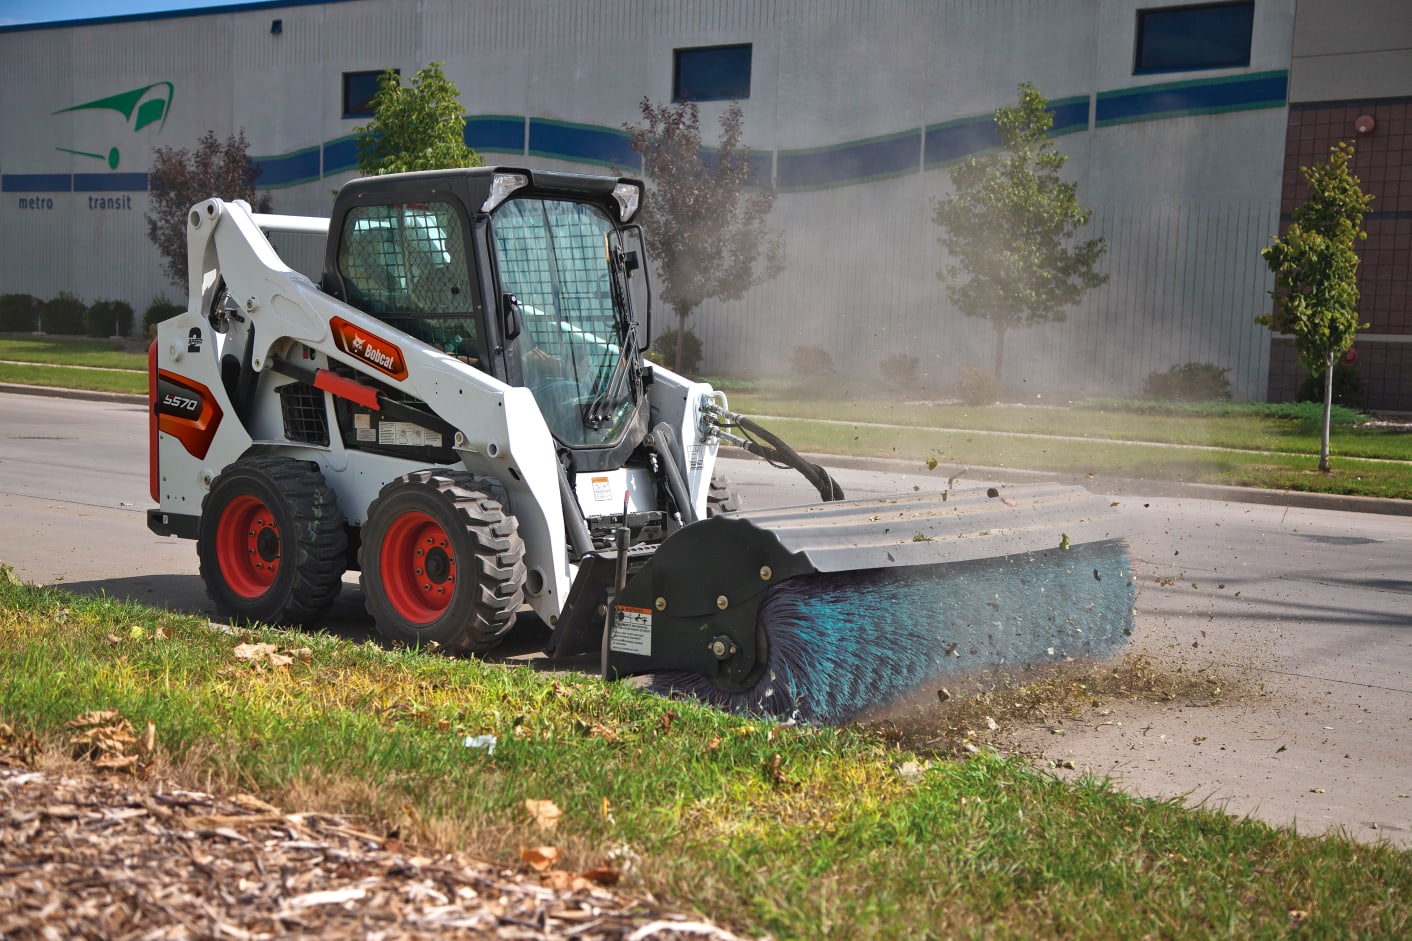 Browse Specs and more for the S570 Skid-Steer Loader - Bobcat of the Rockies